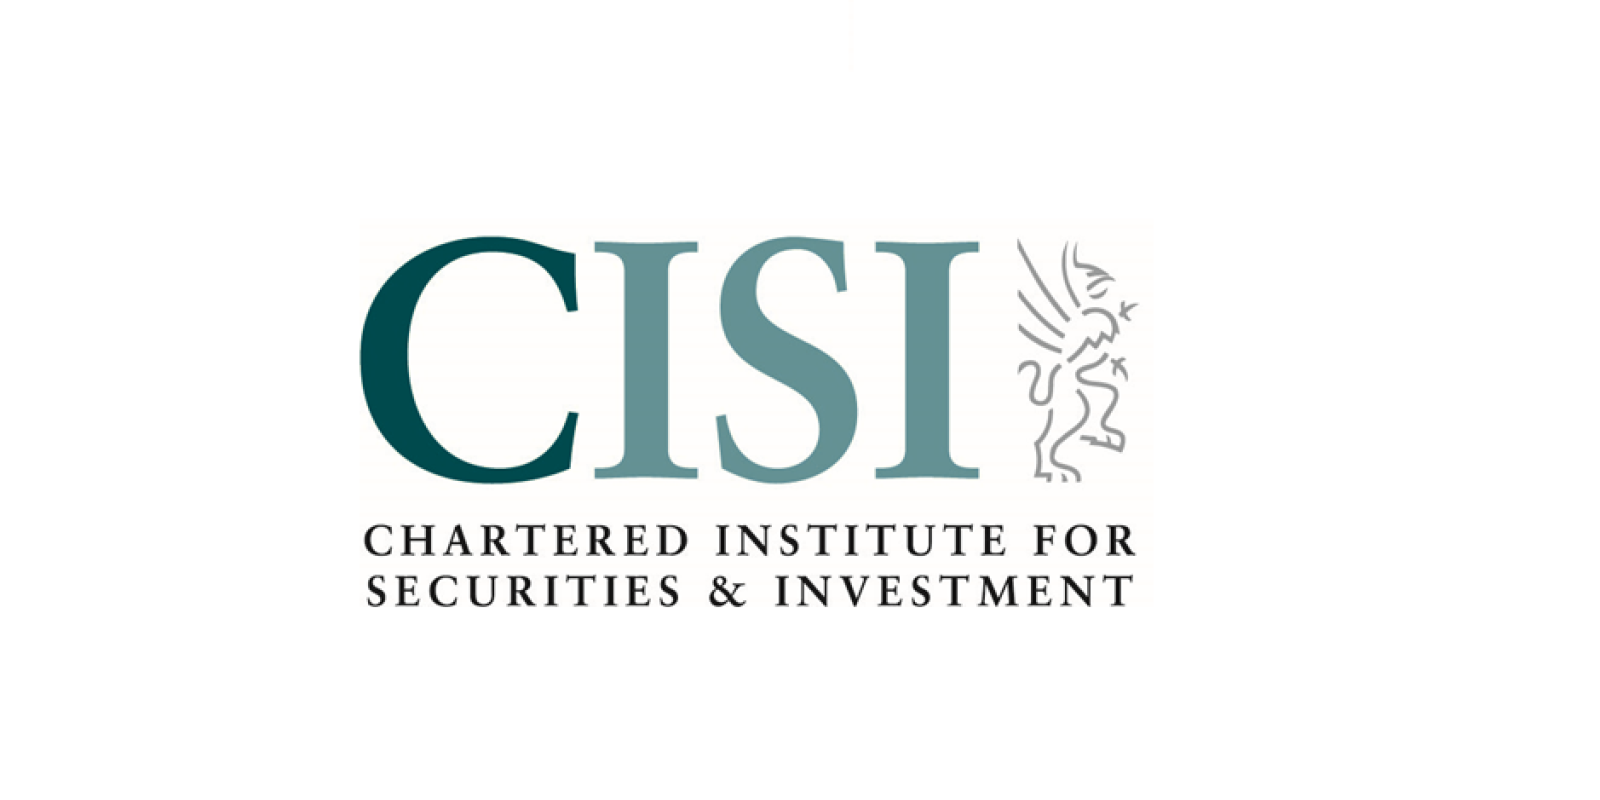 Chartered Institute for Securities and Investment